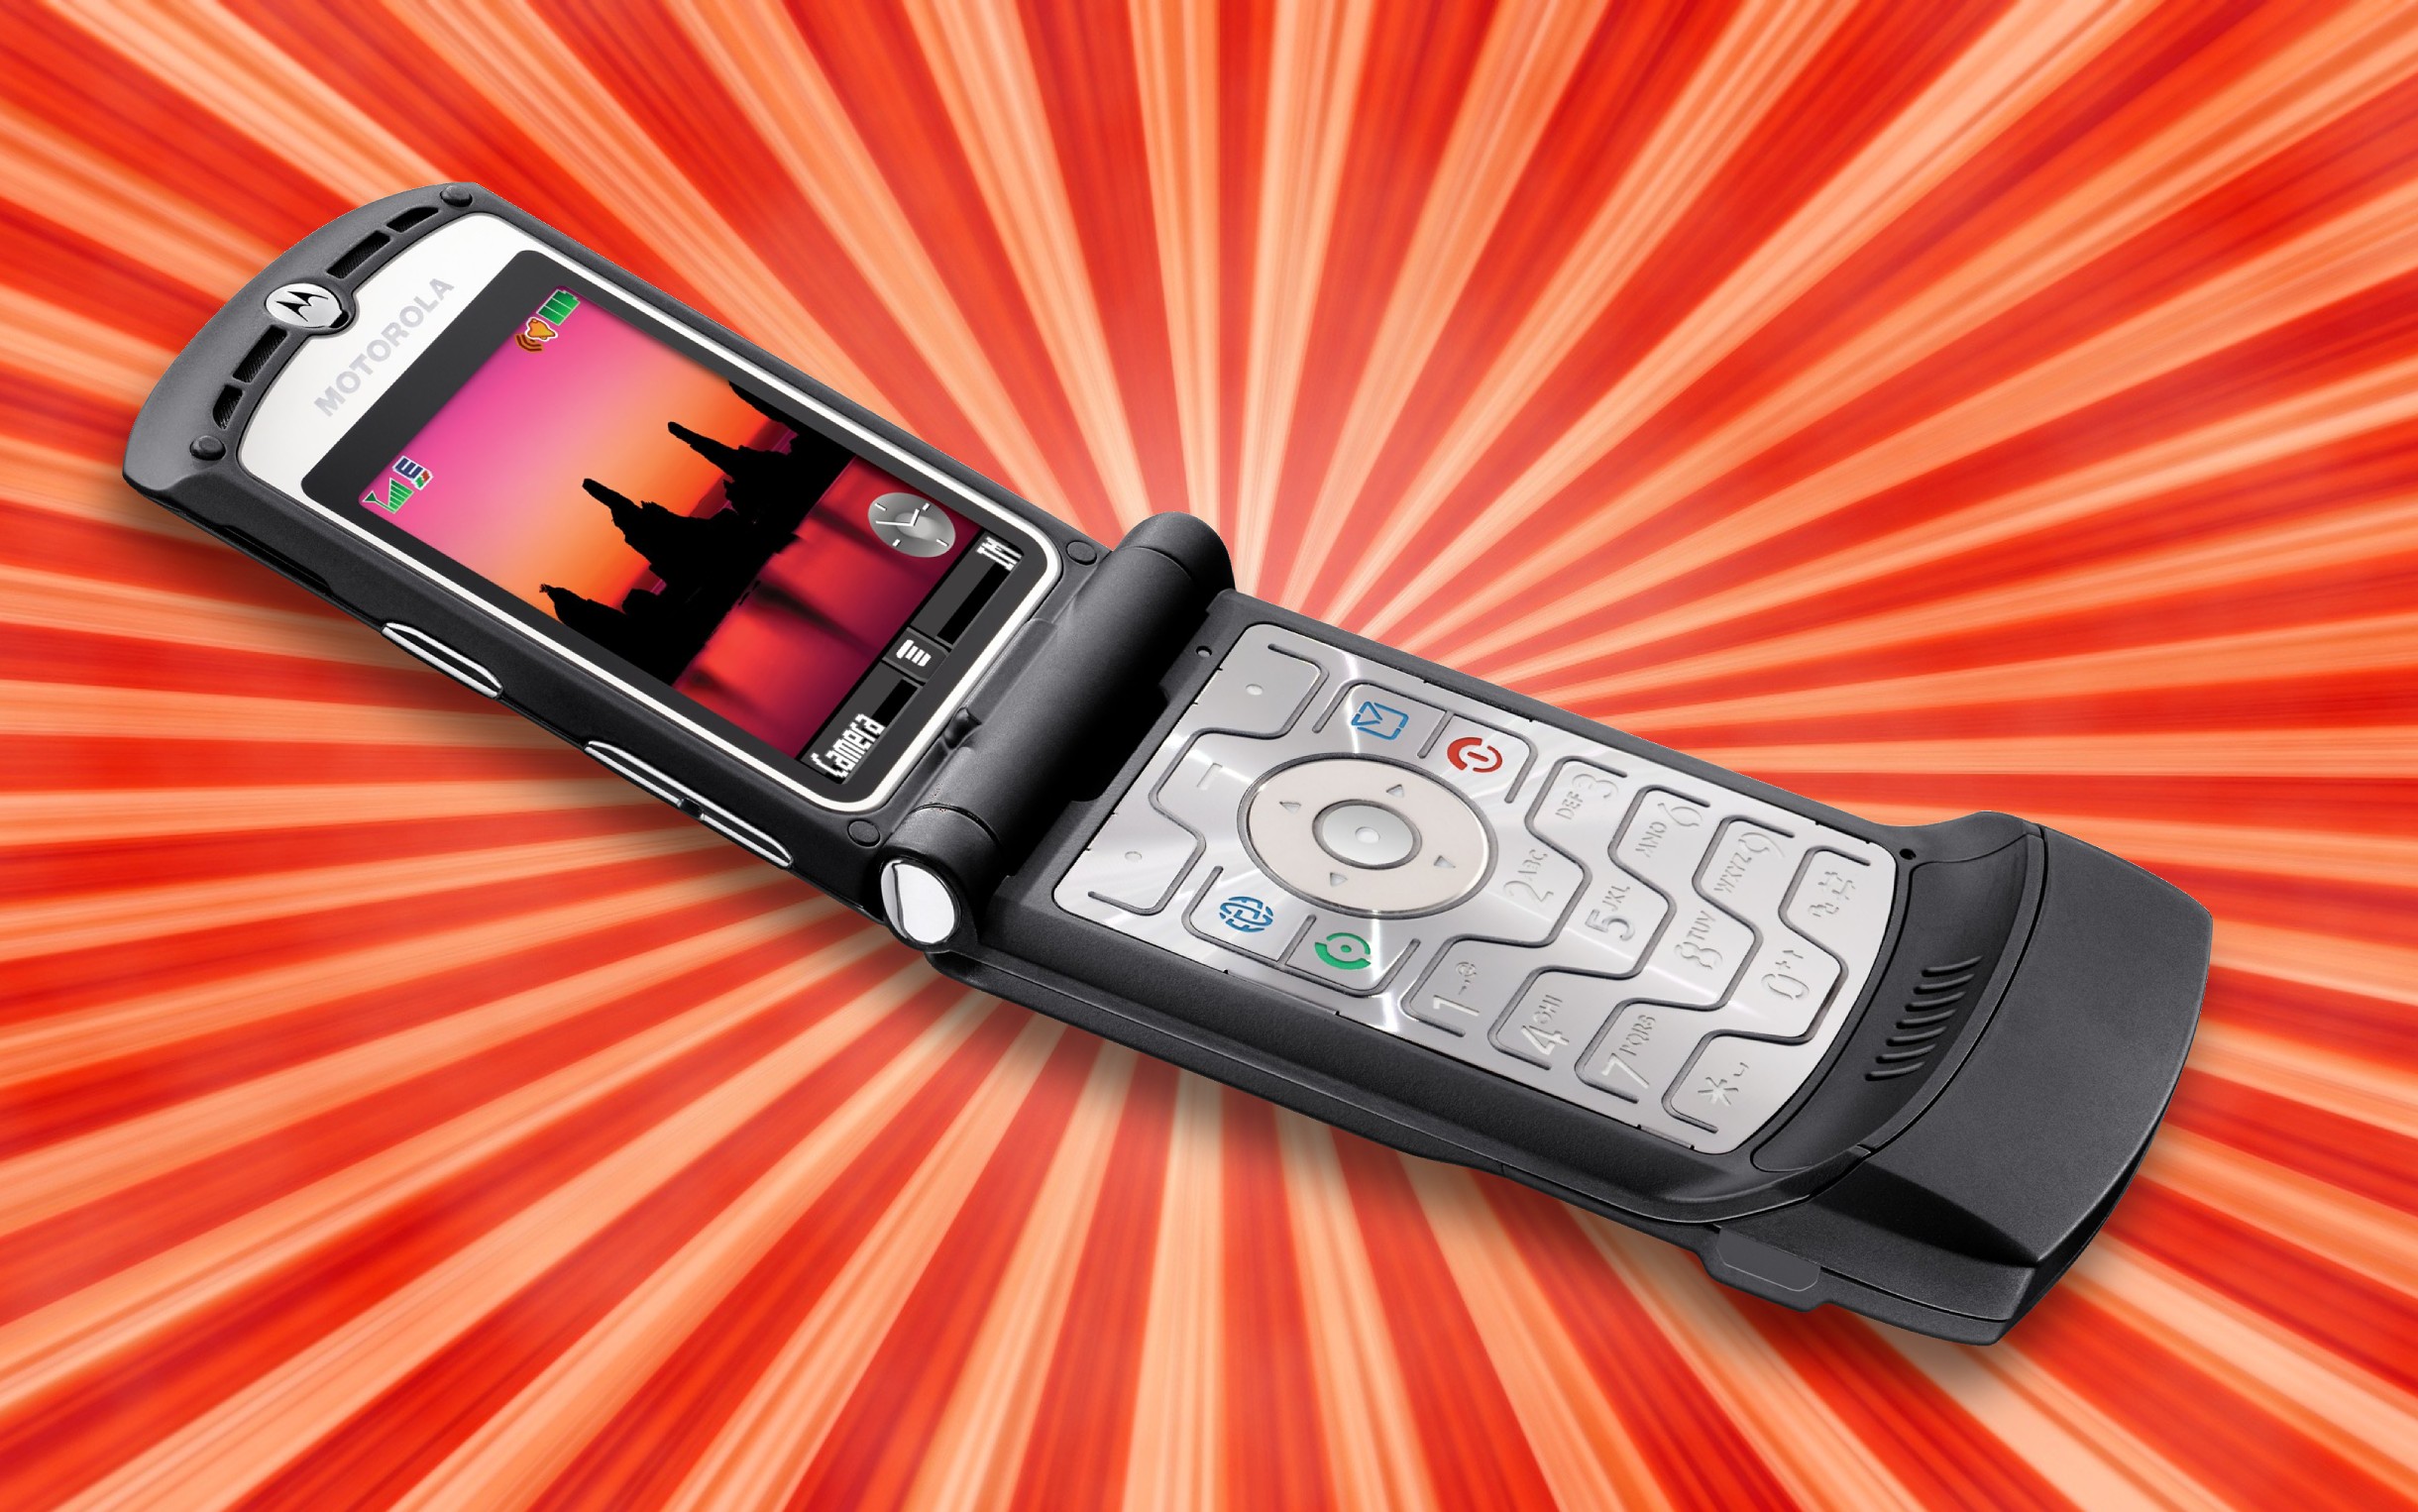 Nokia 2720 Flip Phone Is Back From The Dead, Exactly 10 Years After Its  Original Launch